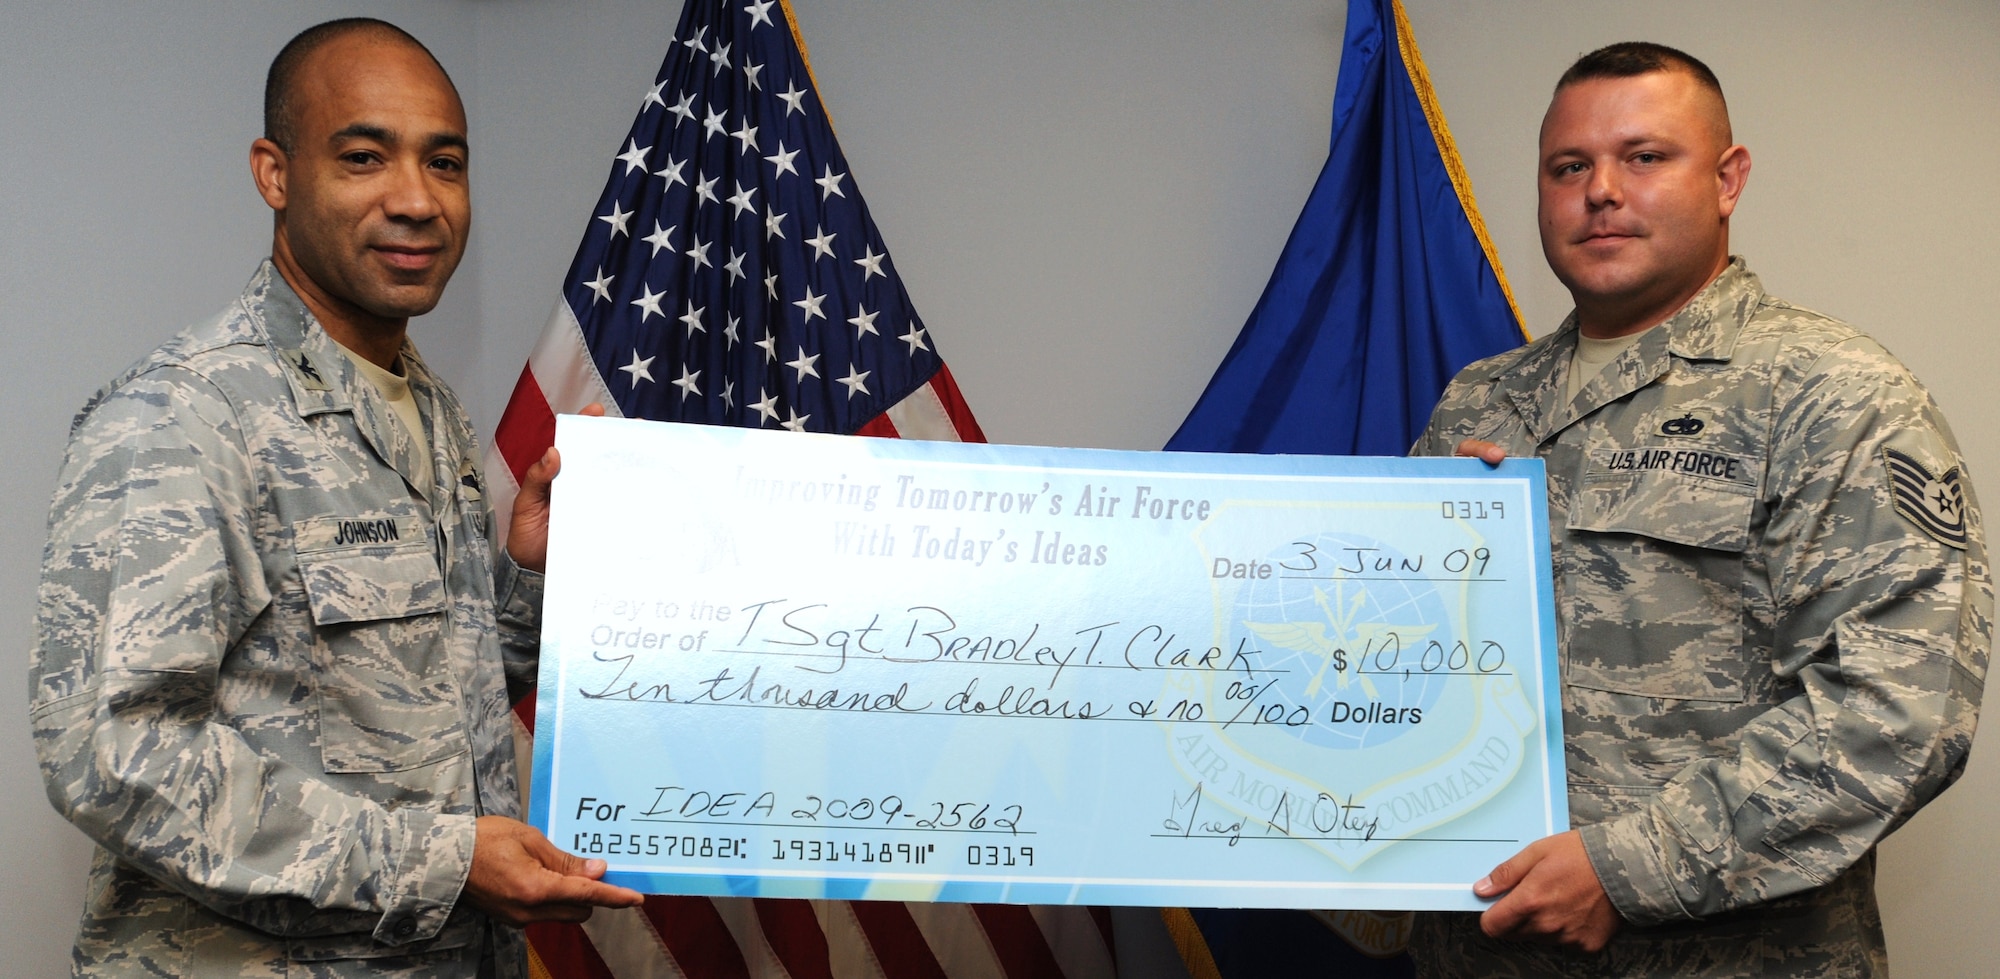 Col. James Johnson, former 19th Airlift Wing vice commander, presents a check for $10,000 to Tech. Sgt. Brad Clark, 19th Component Maintenance Squadron jet engine intermediate maintenance supervisor, at Bldg. 1250 June 10, for his accepted idea submission to the IDEA program. Clark’s idea involved replacing pump housing inserts on a C-130 propeller without taking it off the plane, which expedited maintenance procedures and annually saves approximately $410,000. (U.S. Air Force Photo by Senior Airman Christine Clark)